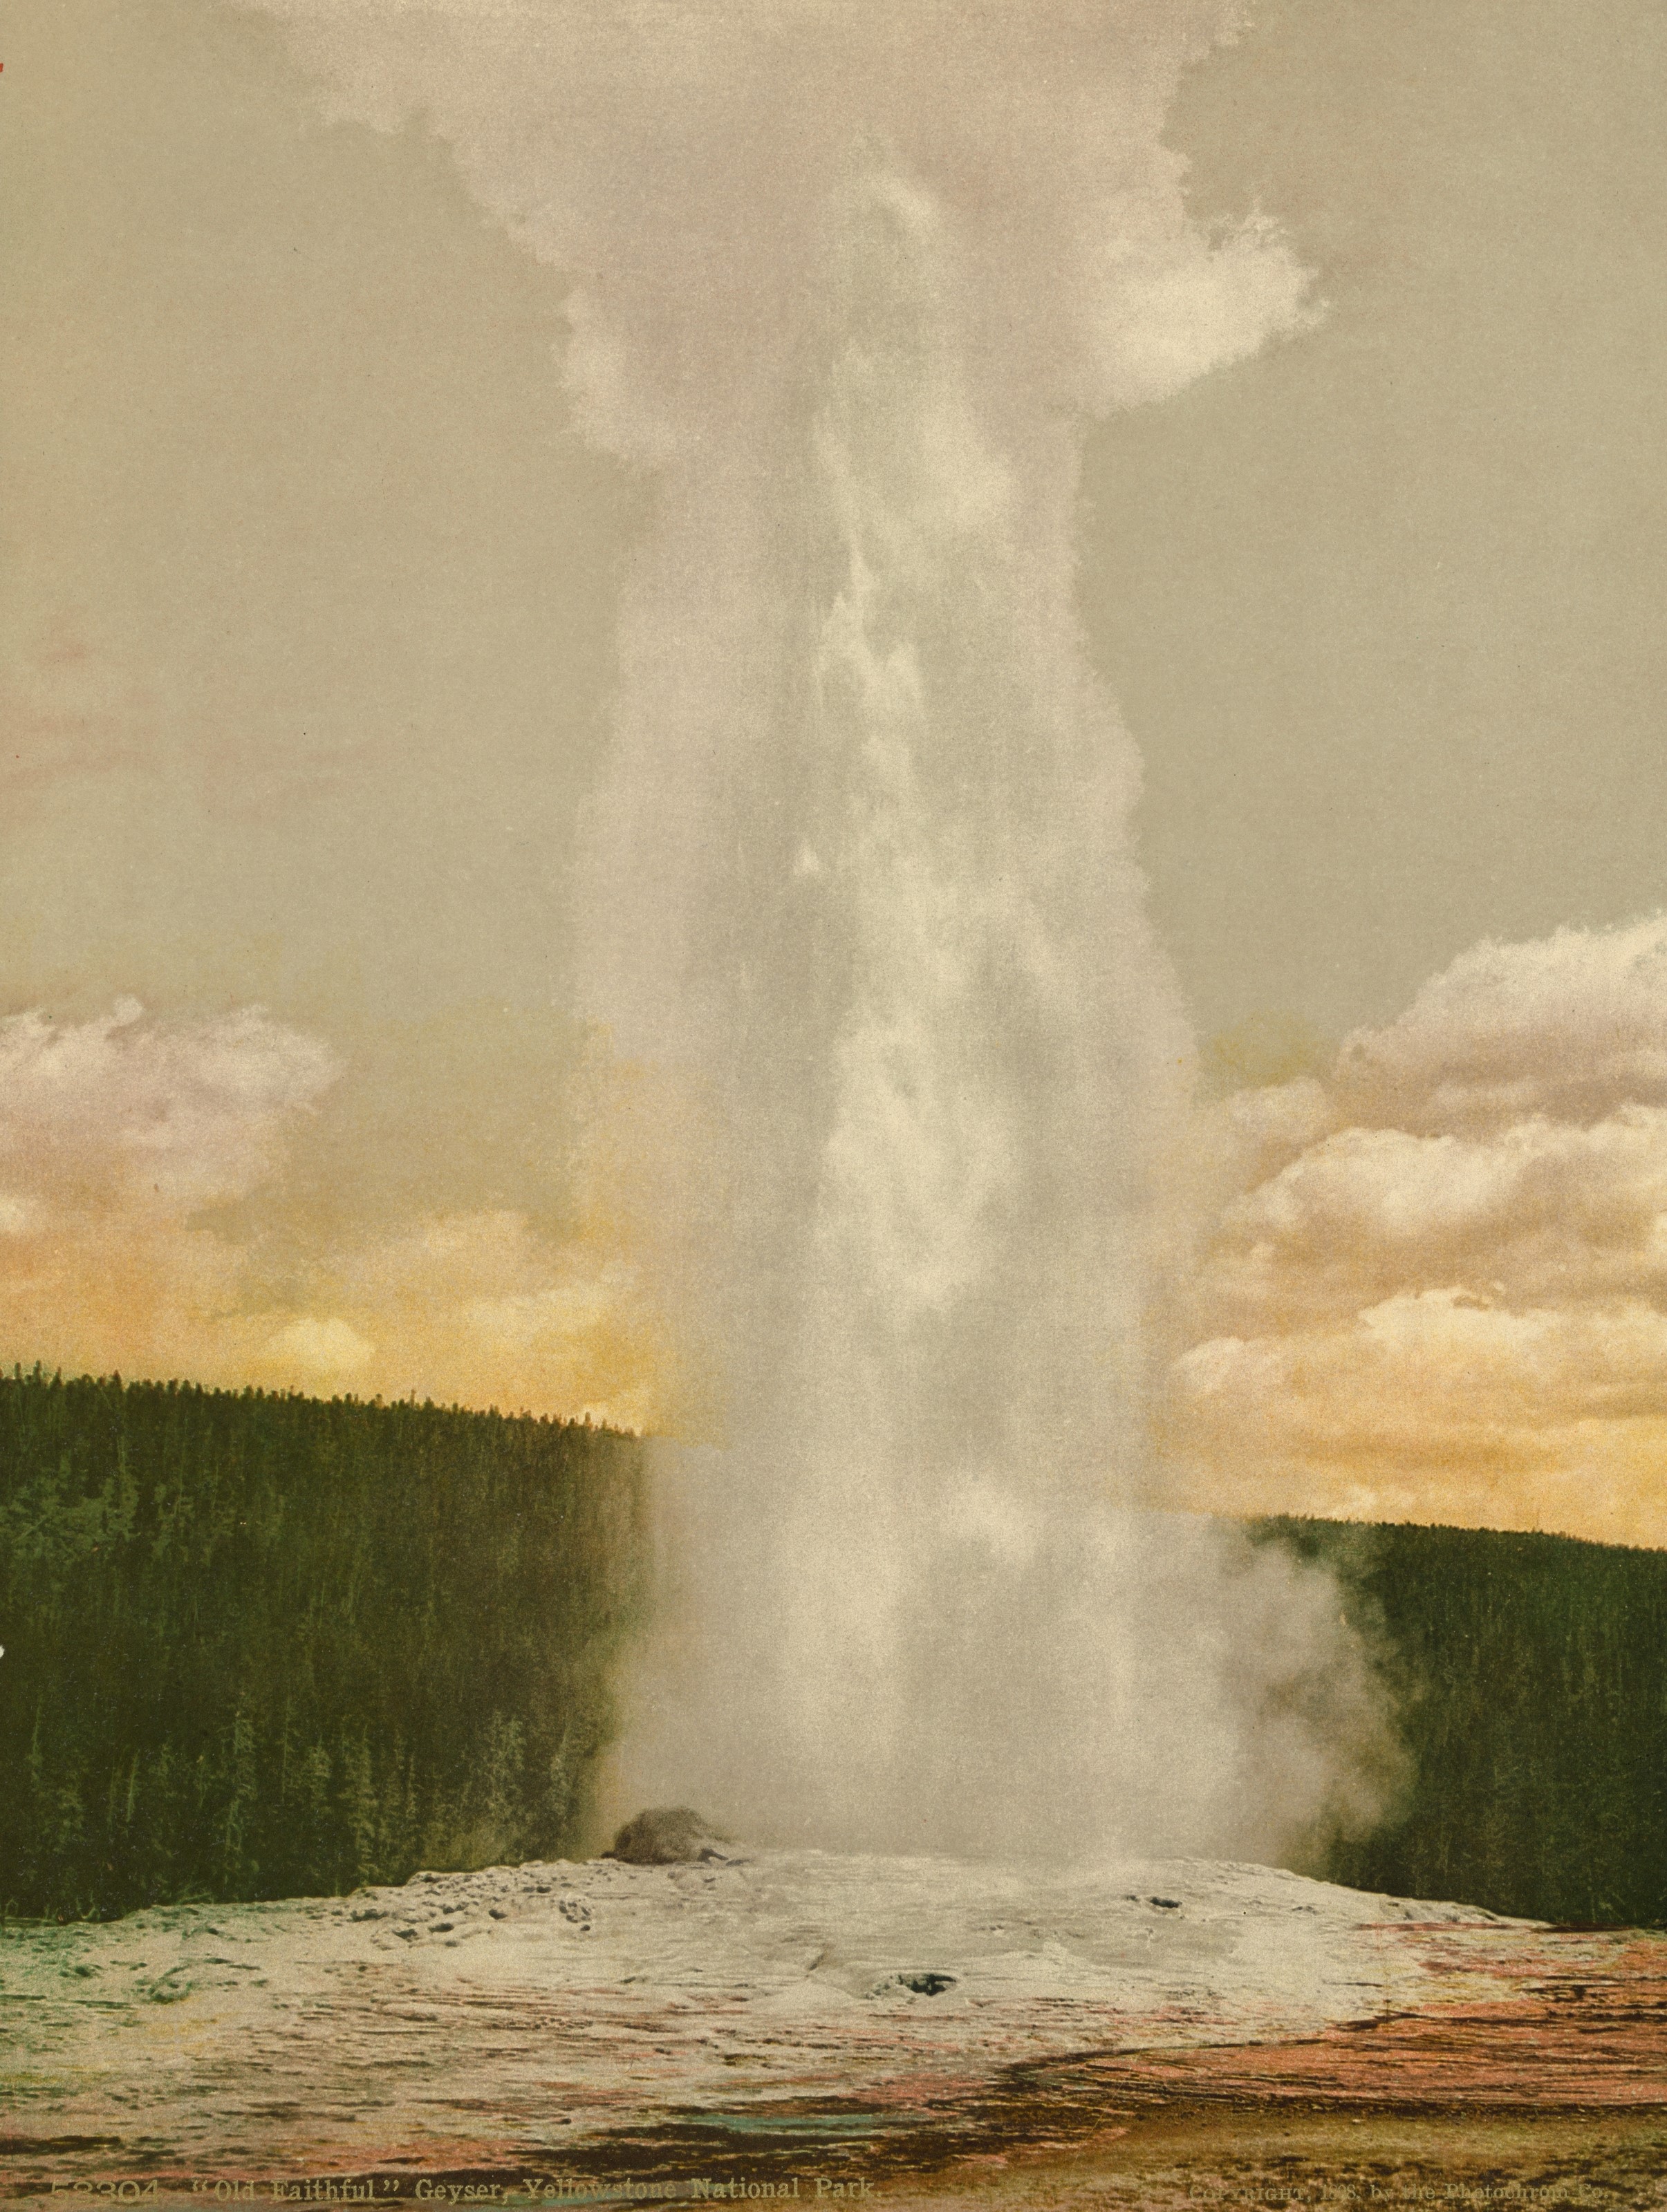 Old Faithful Geyser nature wallpaper | Beautiful places to visit,  Yellowstone national park, National parks